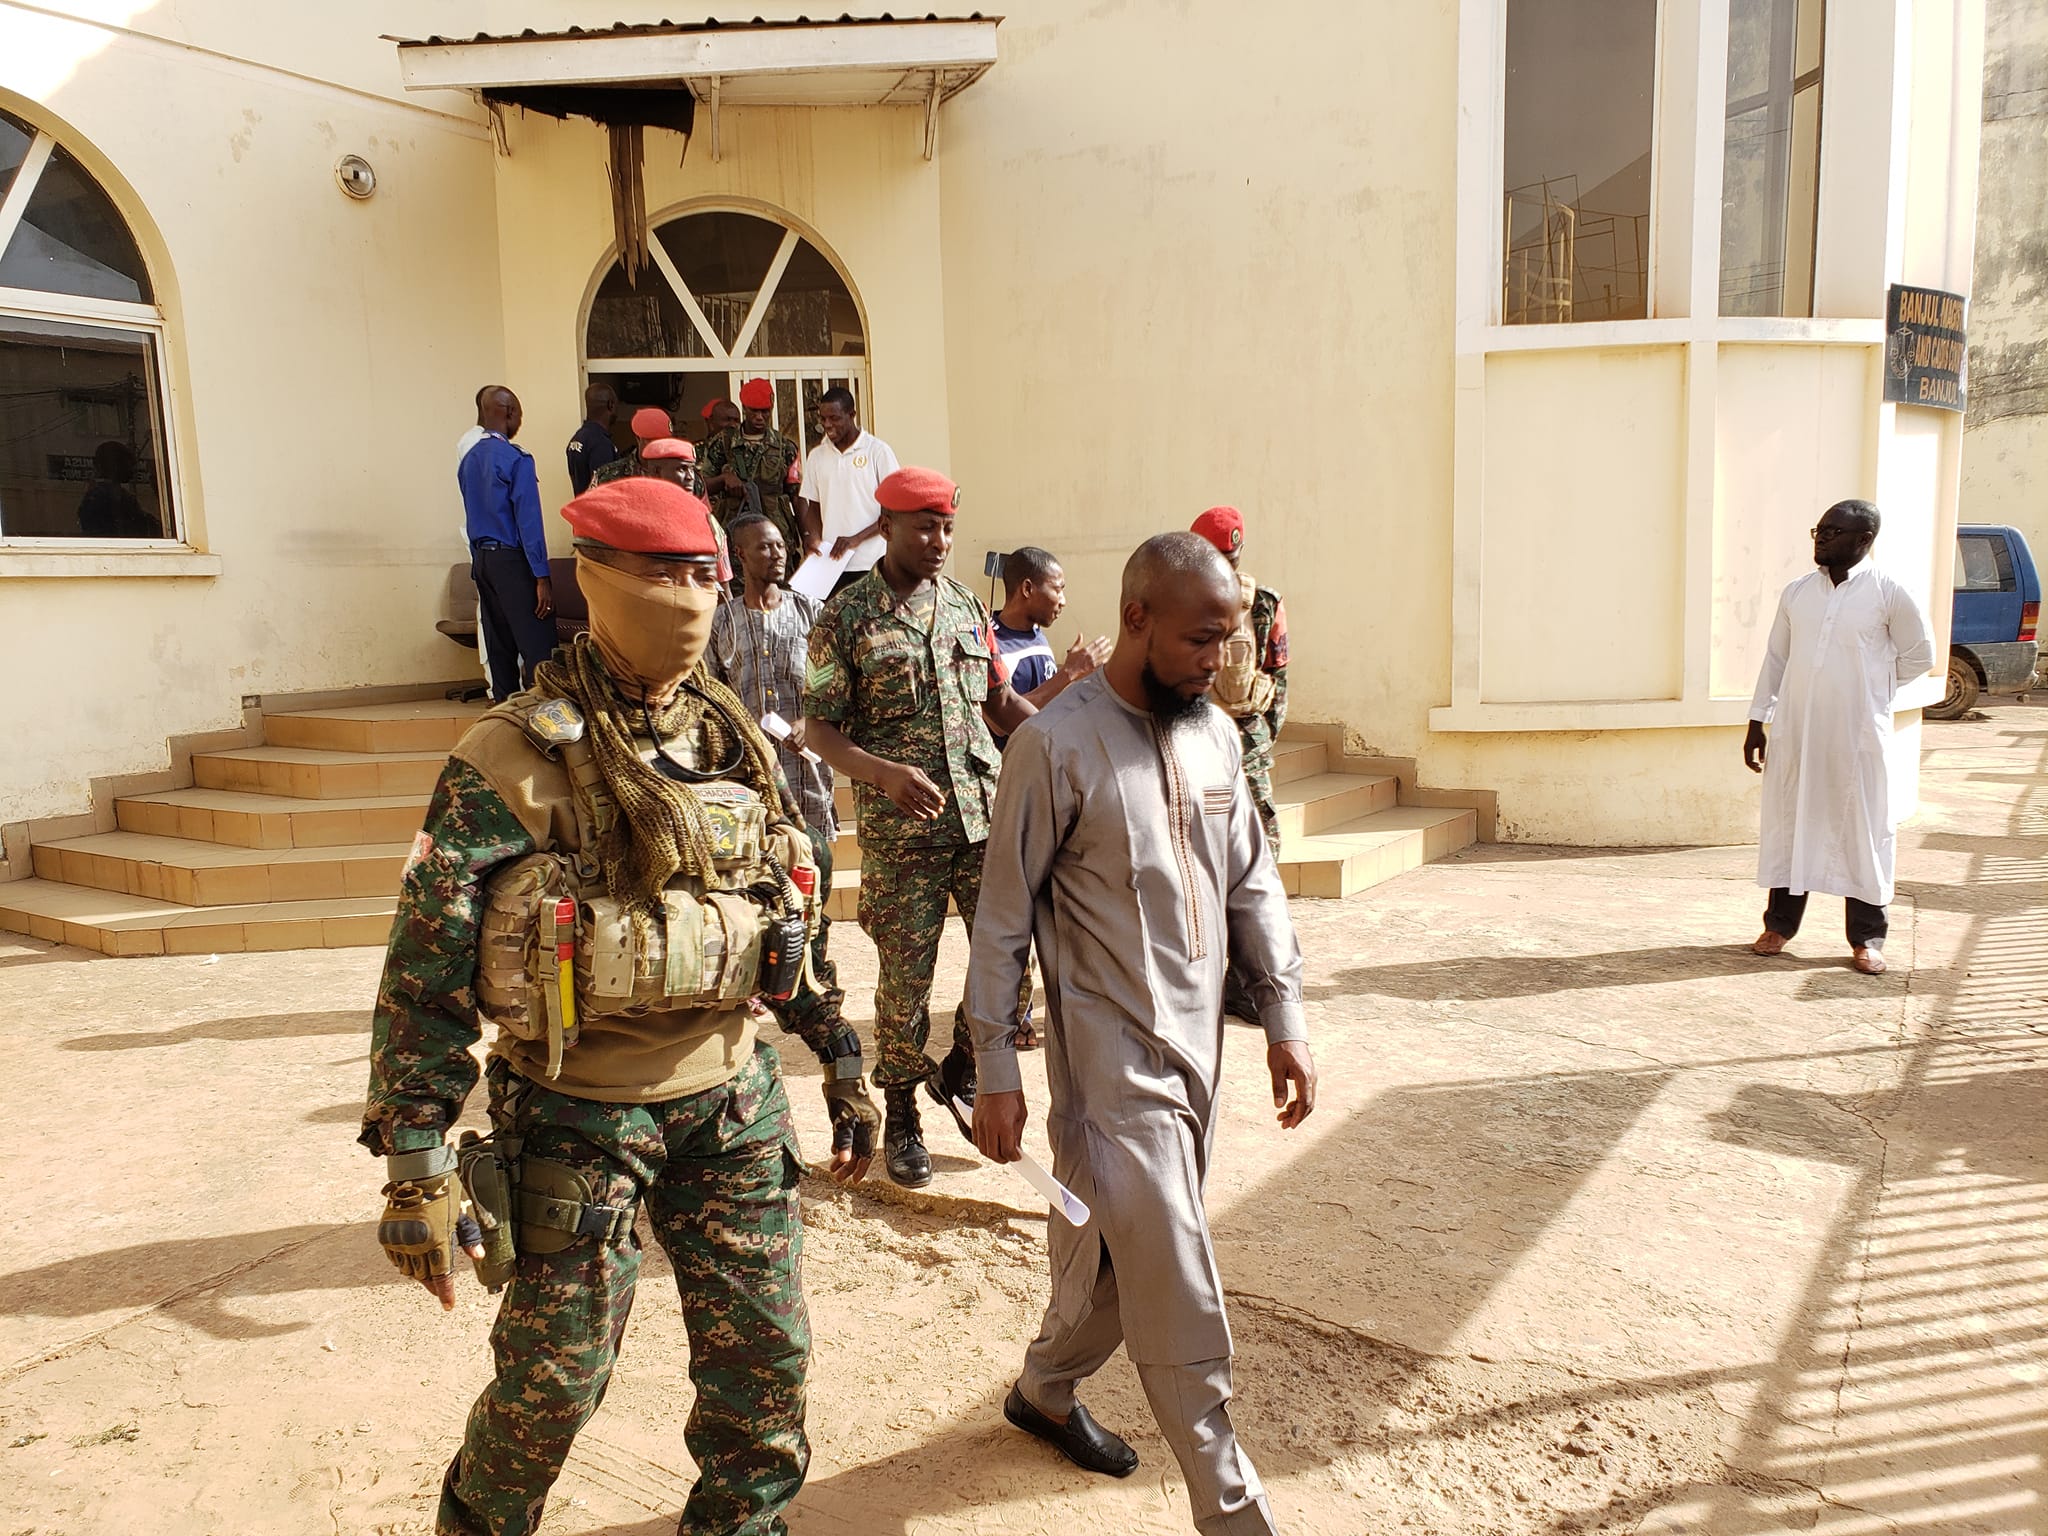 Court frees soldier, tells 2 others they have to be tried for coup plot